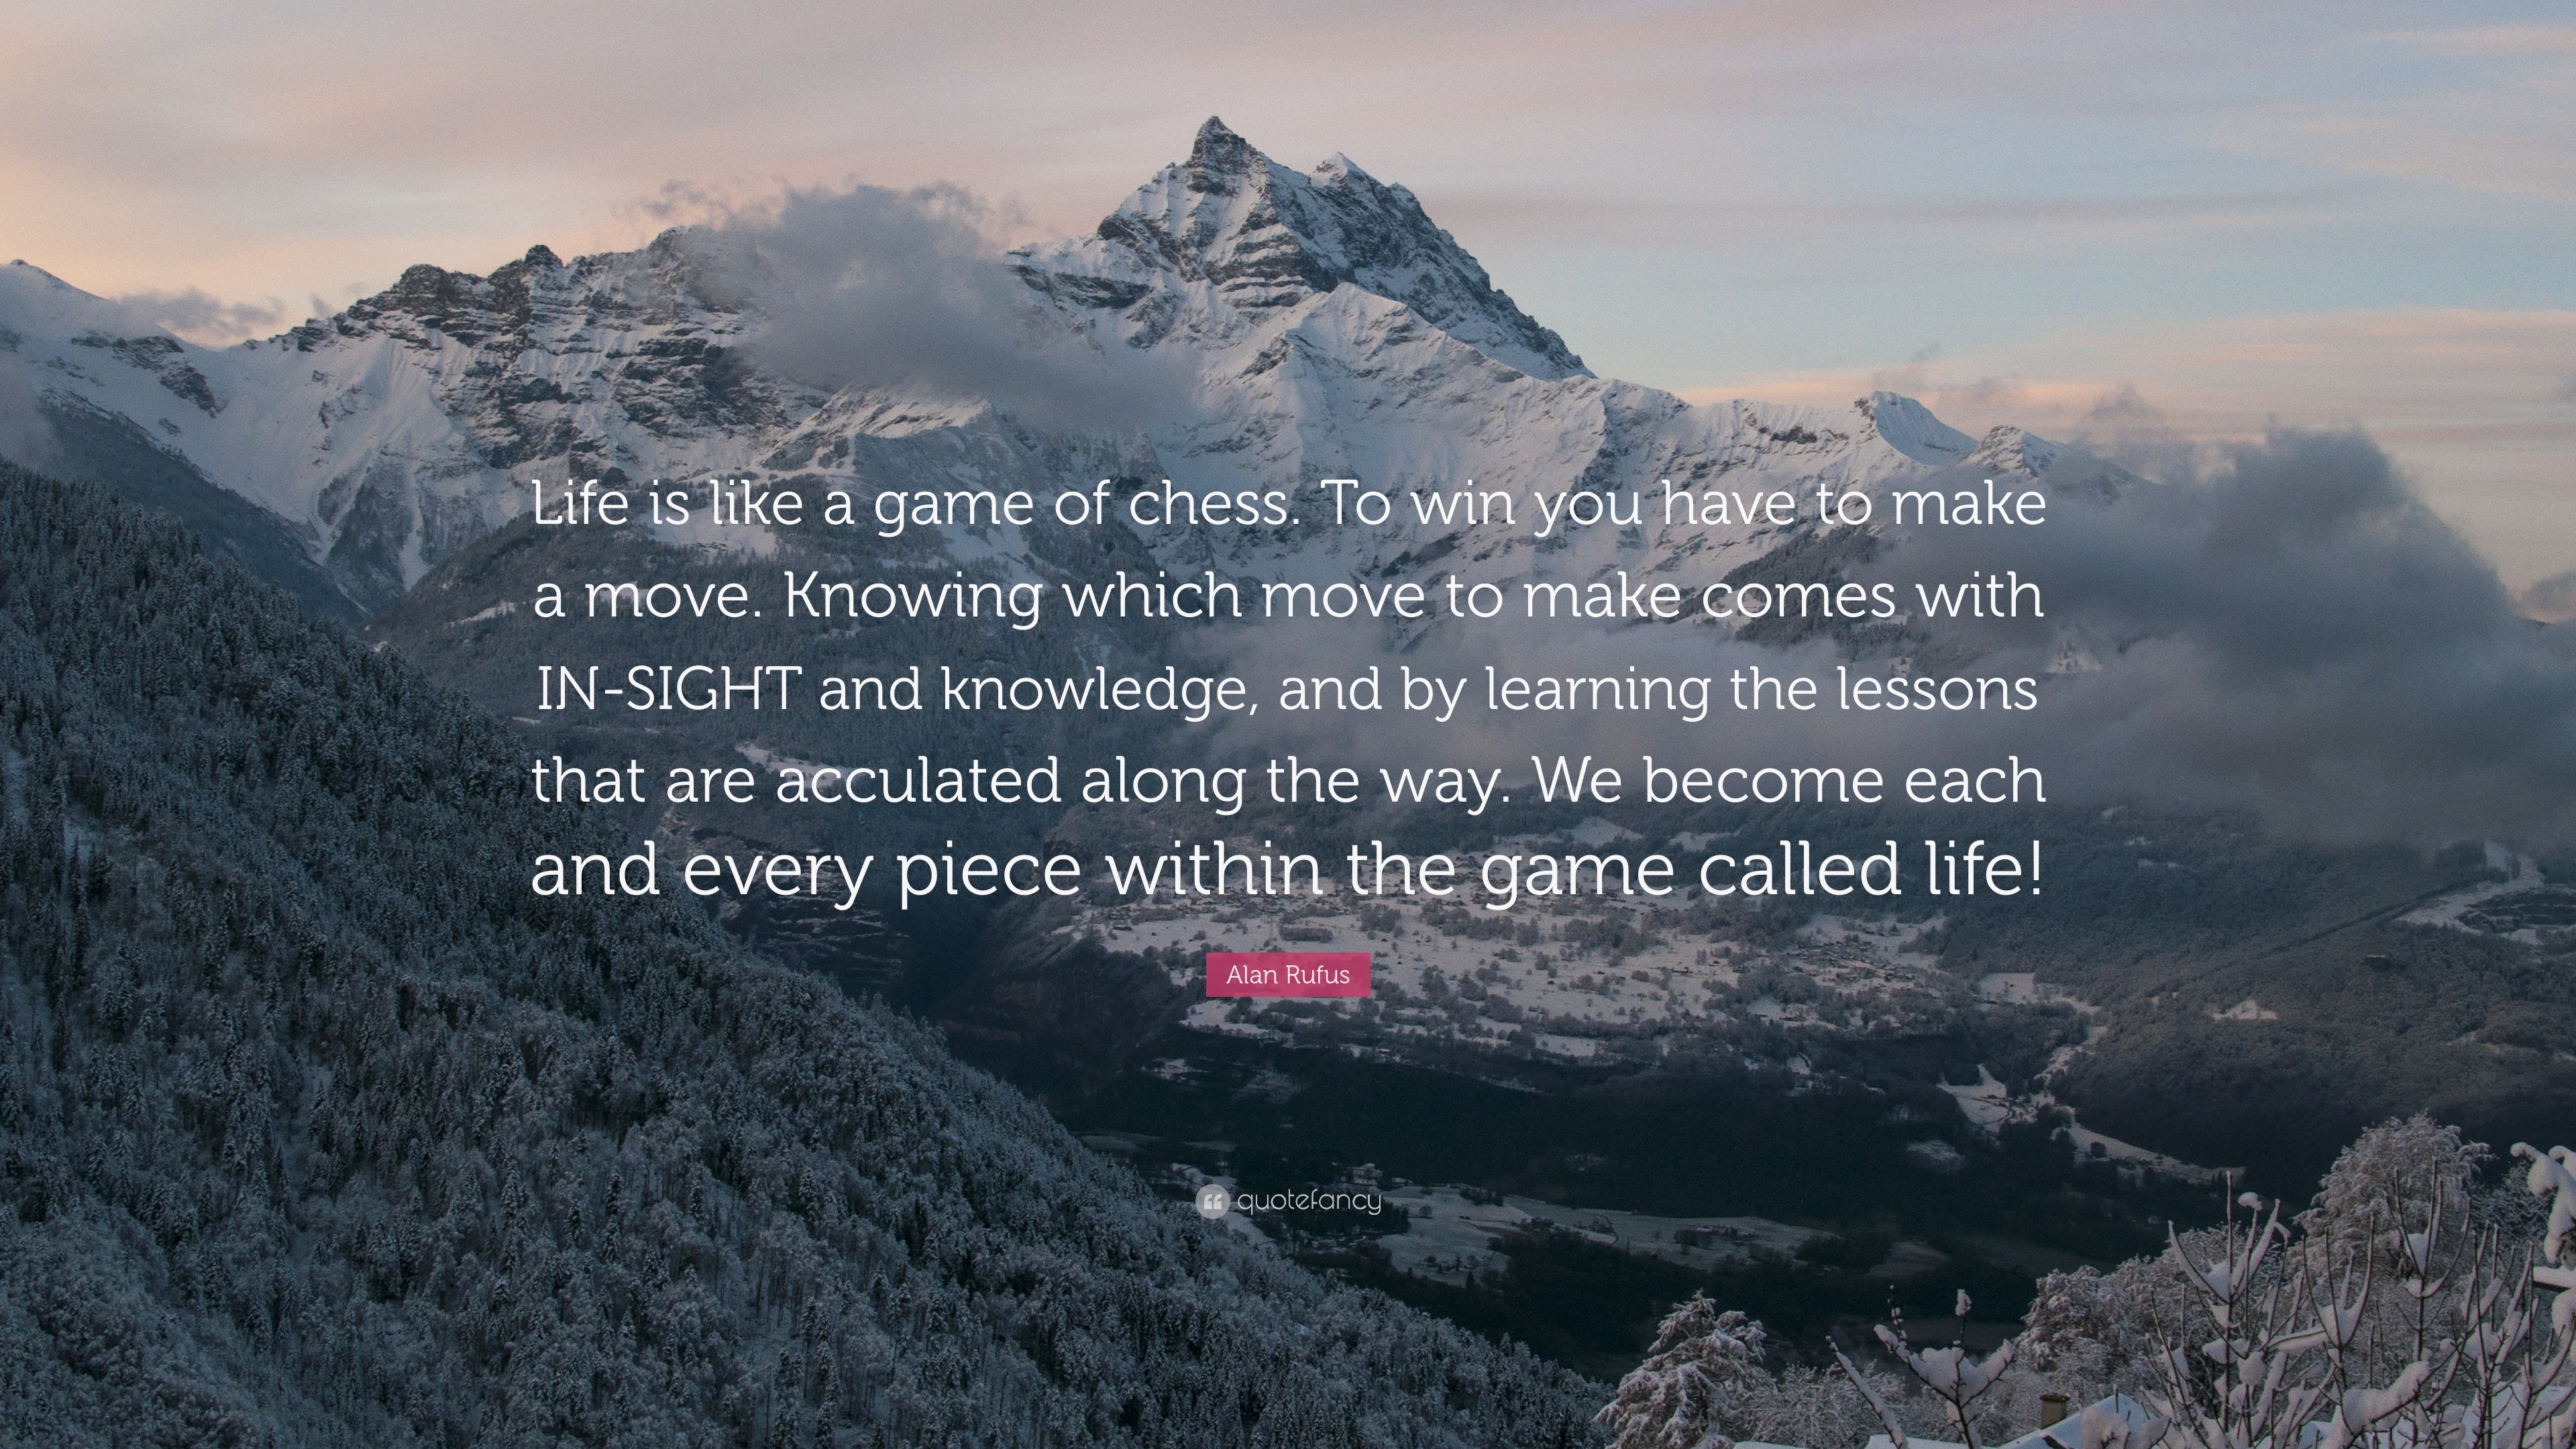 Alan Rufus Quote: “Life is like a game of chess. To win you have to make a  move. Knowing which move to make comes with IN-SIGHT and knowled”